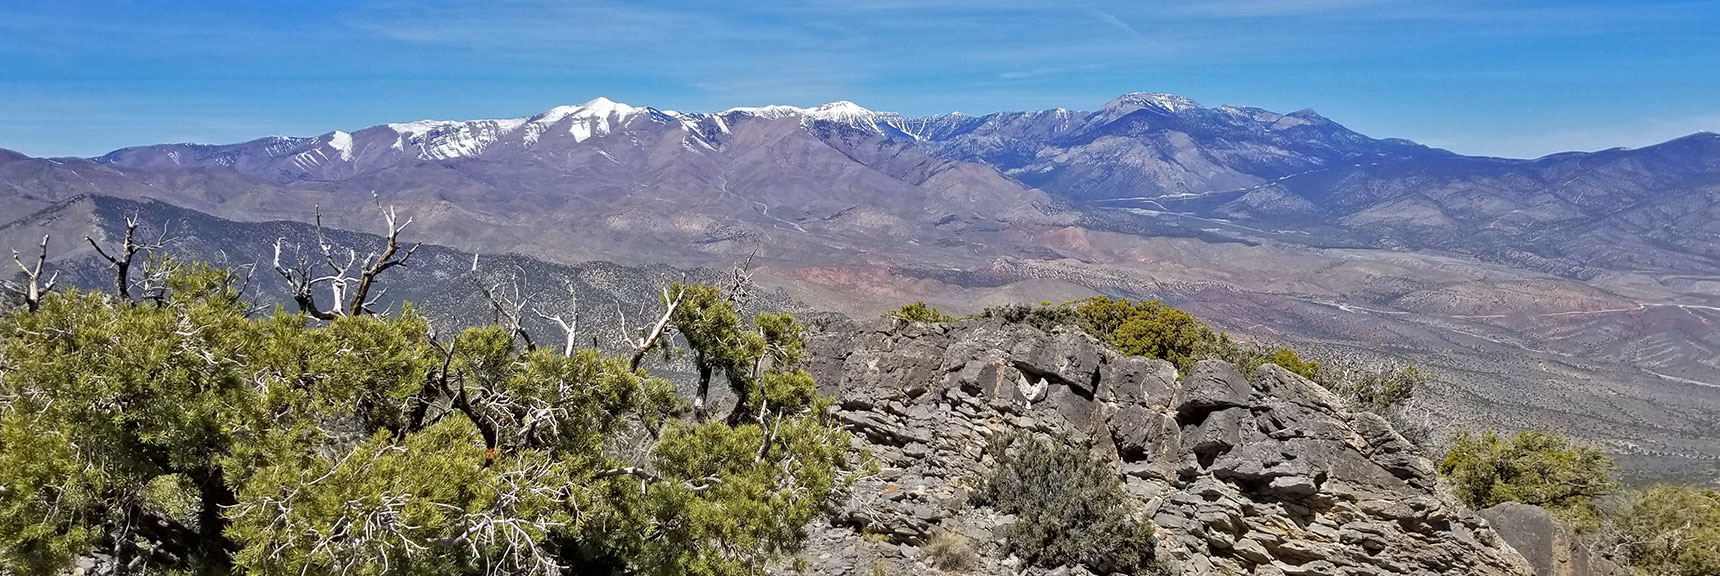 Mt Charleston Wilderness Viewed from the 7400ft High Point on the La Madre Mountain Nevada Northern Approach